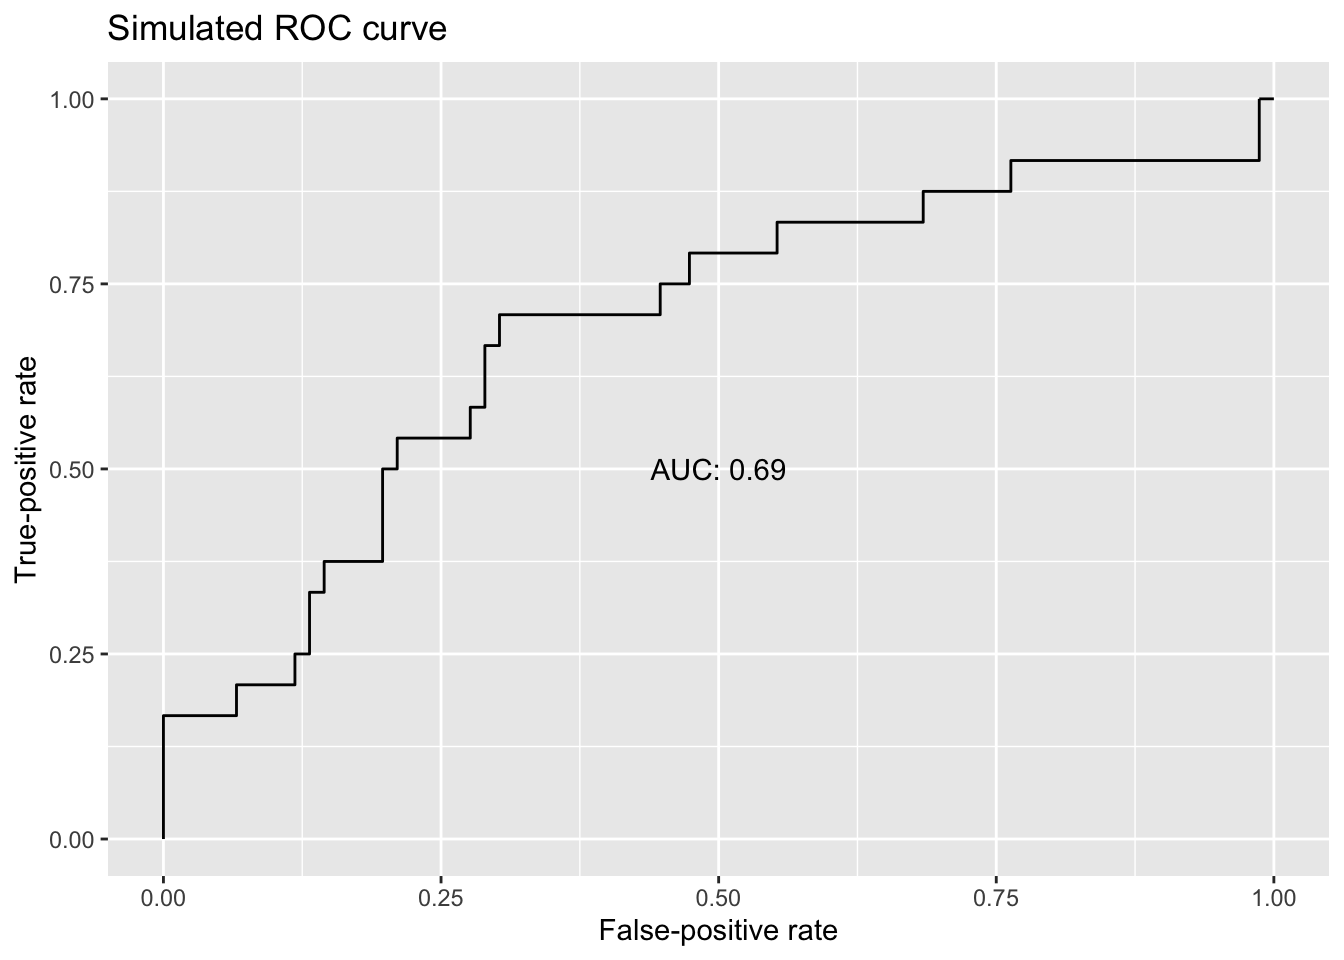 roc curve for model using simulated data, with auc superimposed